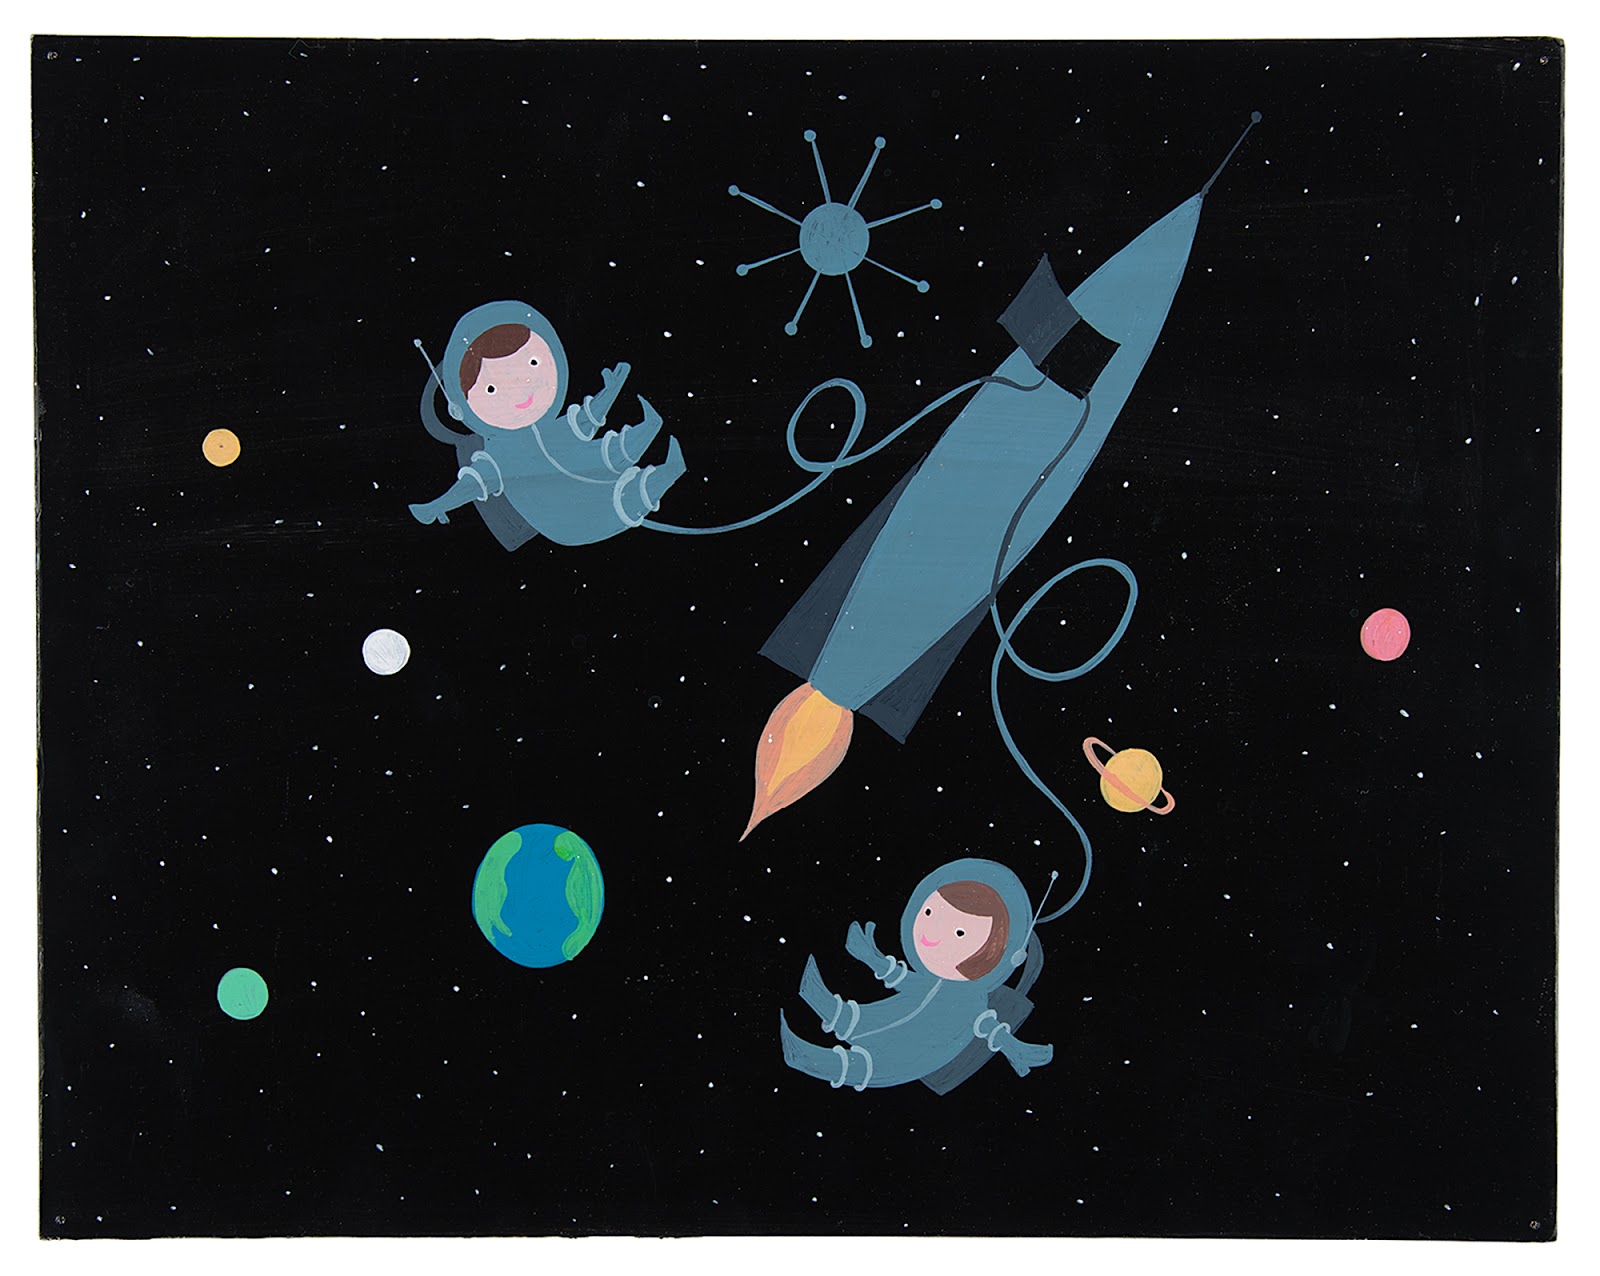 Blair’s concept painting for the It’s A Small World attraction depicting two cosmonaut children drifting through space while attached to a rocket sold for $22,781.